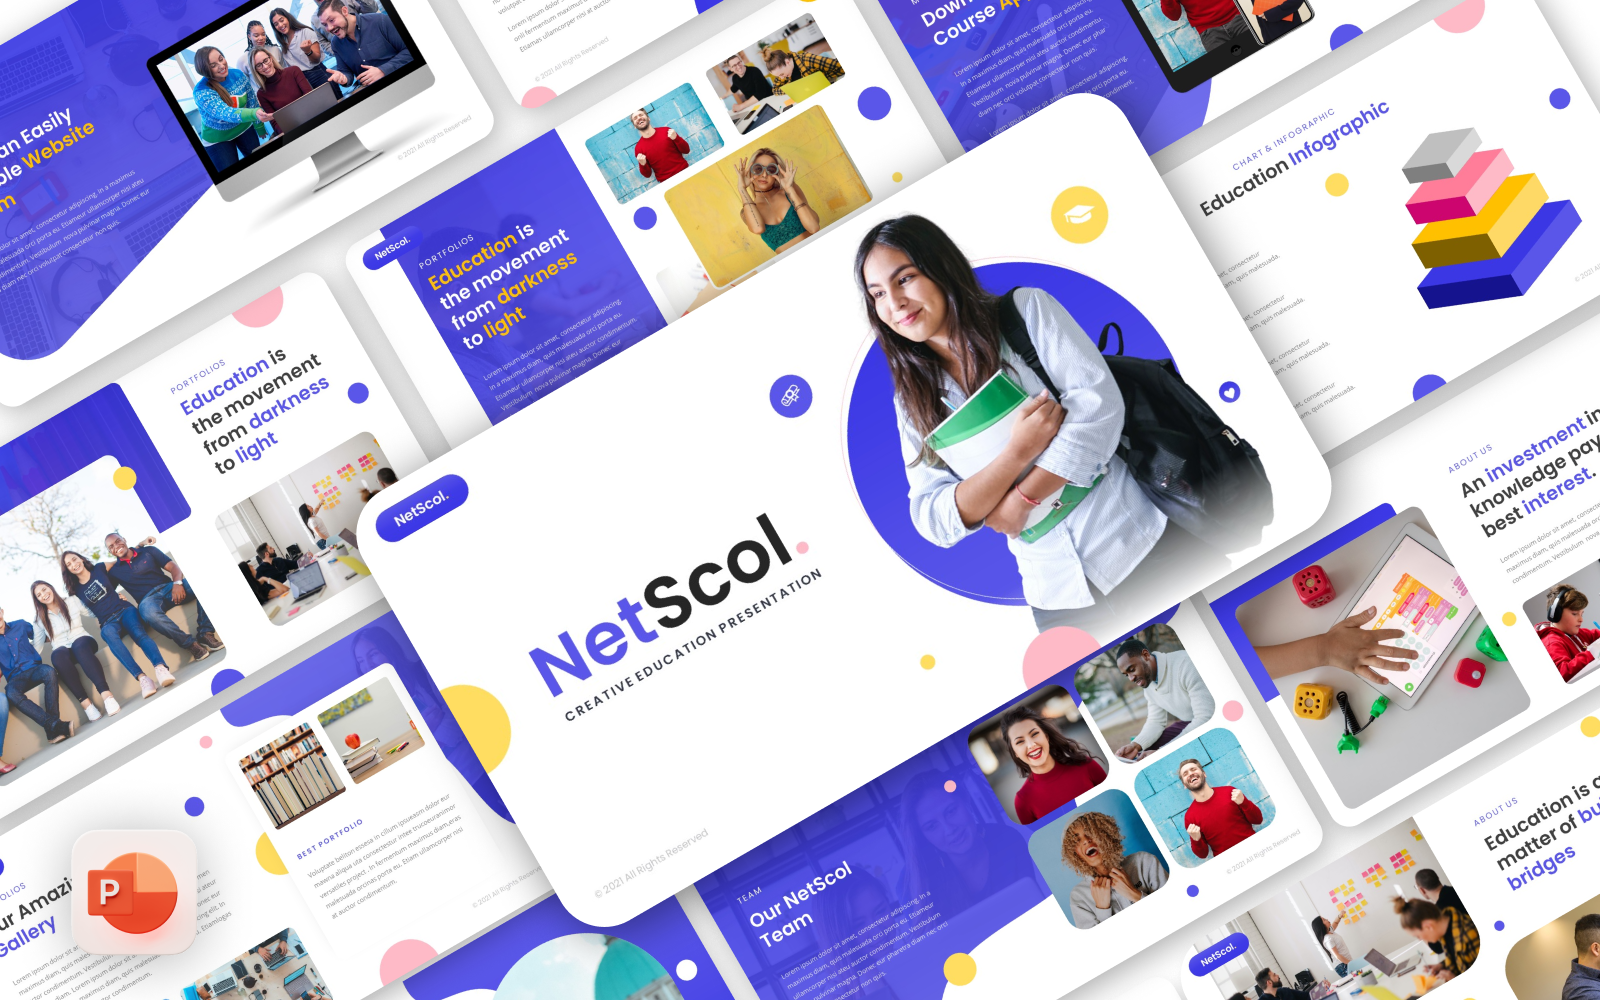 NetScol – Creative Education PowerPoint Template